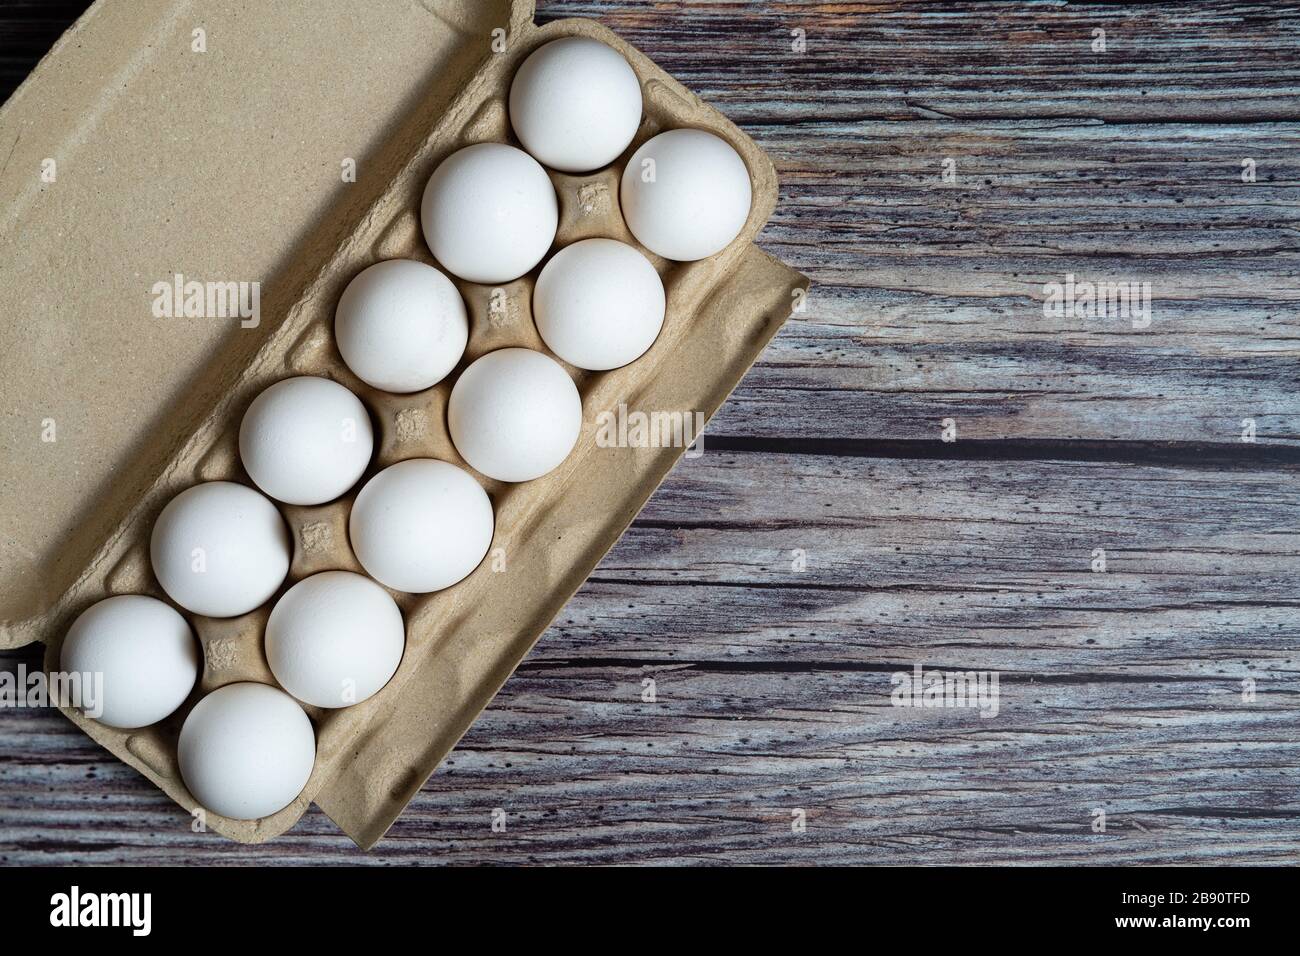 Chicken eggs in egg box on wooden rusty background Stock Photo